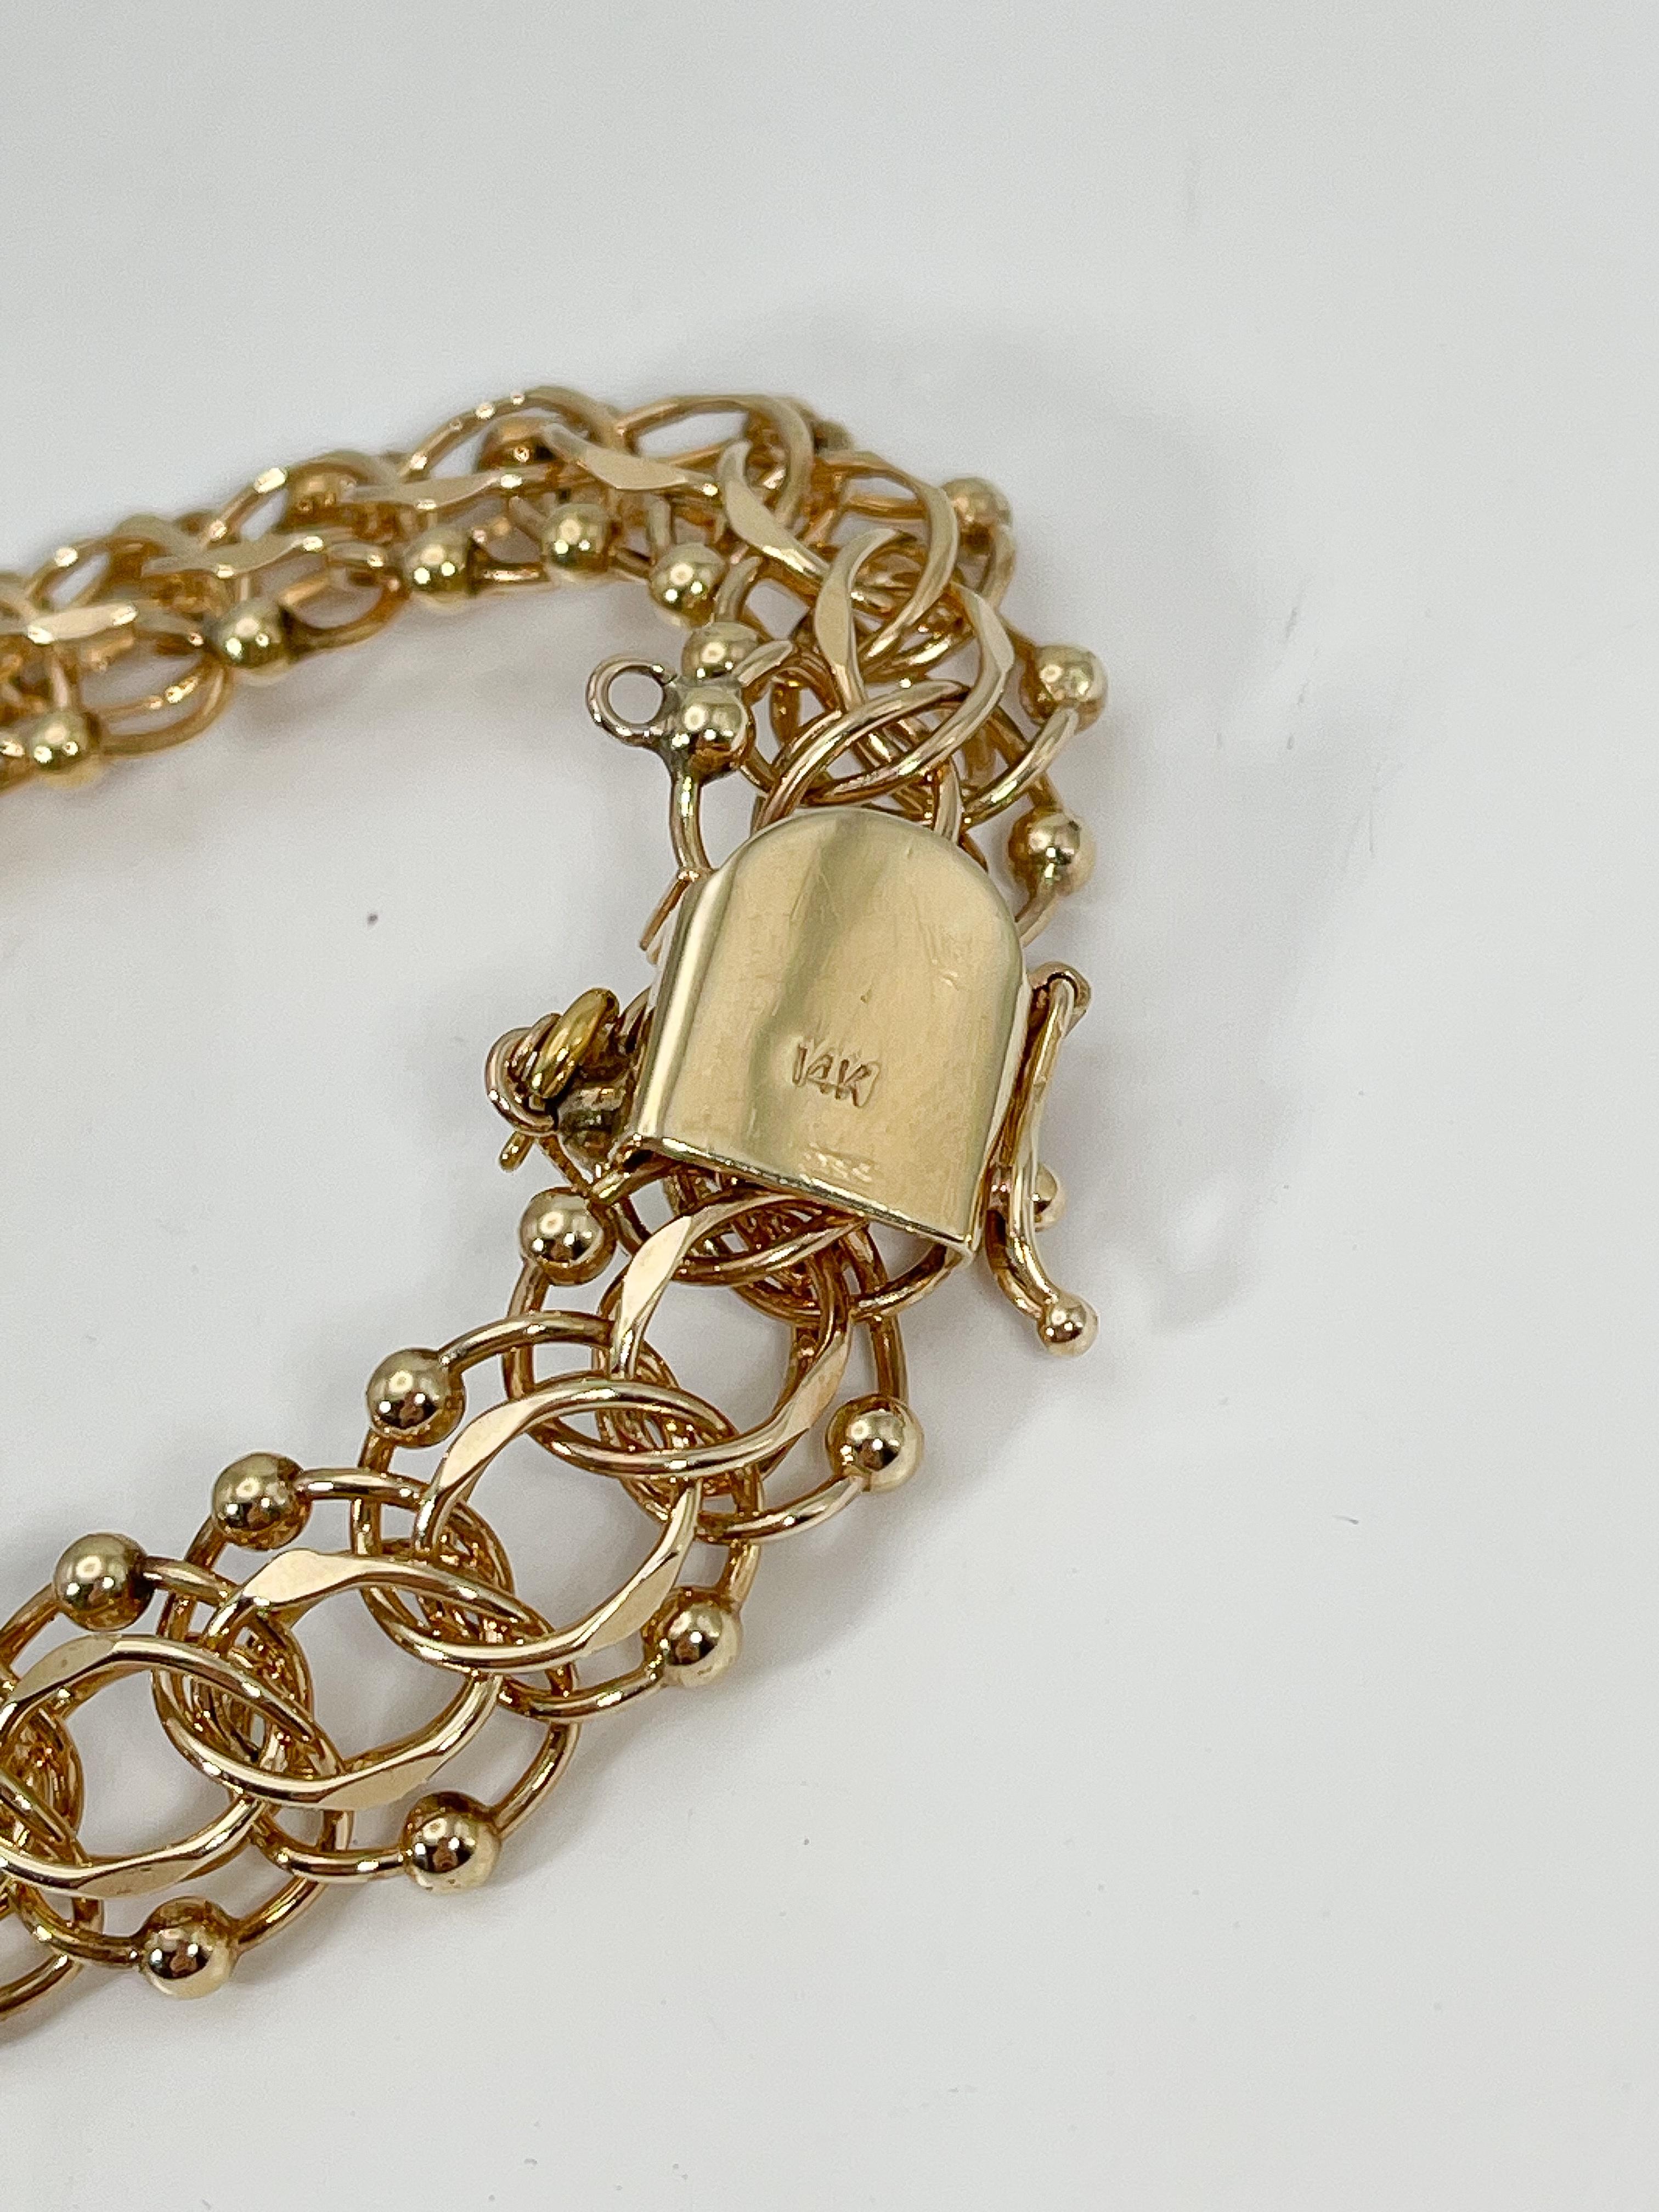 14K Yellow Gold Charm Bracelet In Good Condition For Sale In Stuart, FL